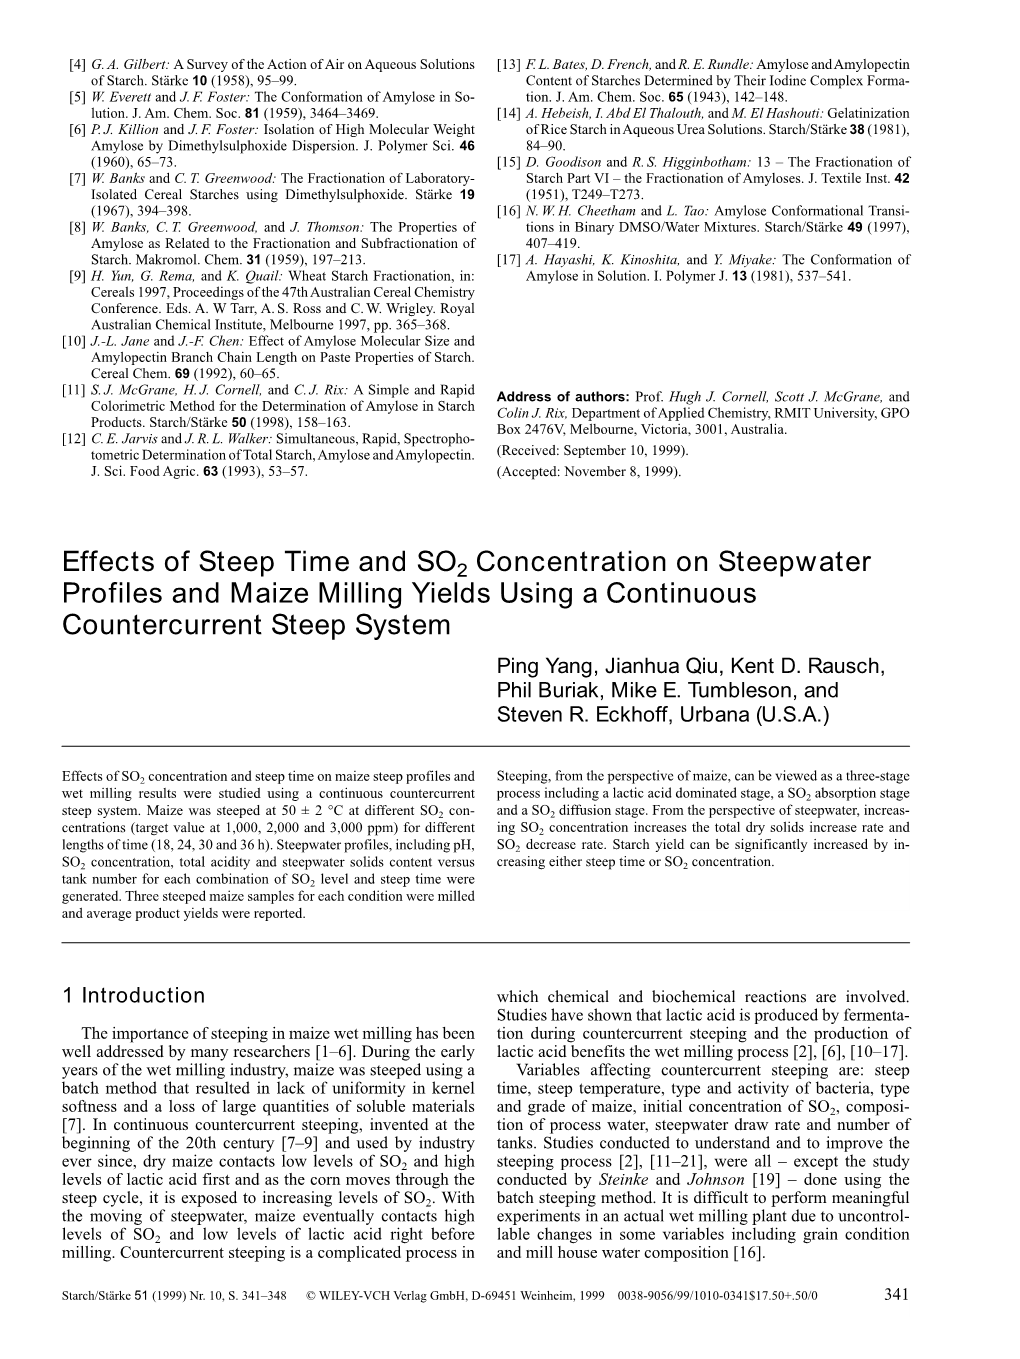 Effects of Steep Time and SO2 Concentration on Steepwater Profiles and Maize Milling Yields Using a Continuous Countercurrent St